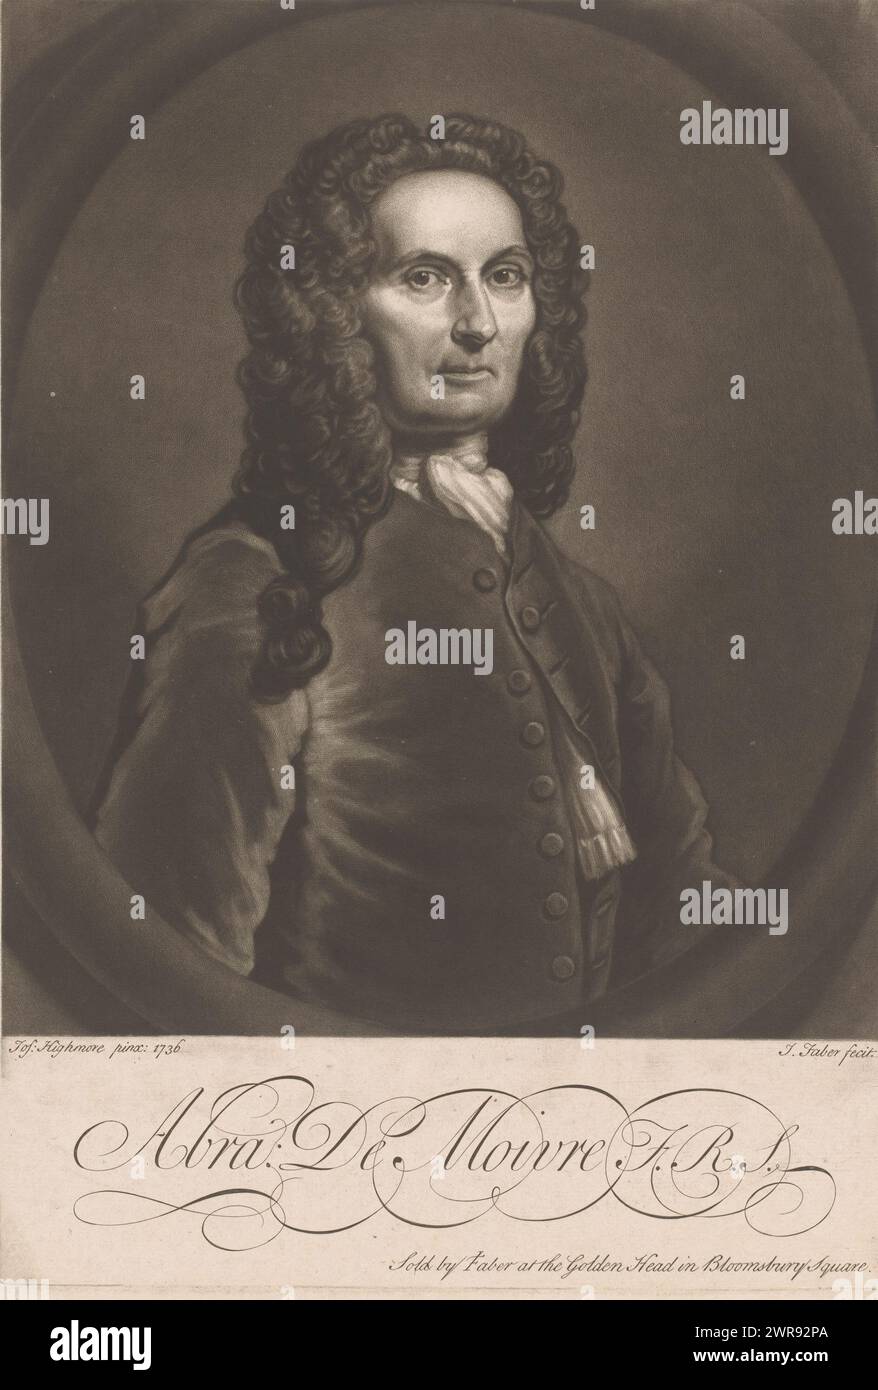 Portrait of Abraham de Moivre, print maker: John Faber (II), after painting by: Thomas Highmore, publisher: John Faber (II), 1736 - 1756, paper, height 327 mm × width 226 mm, print Stock Photo